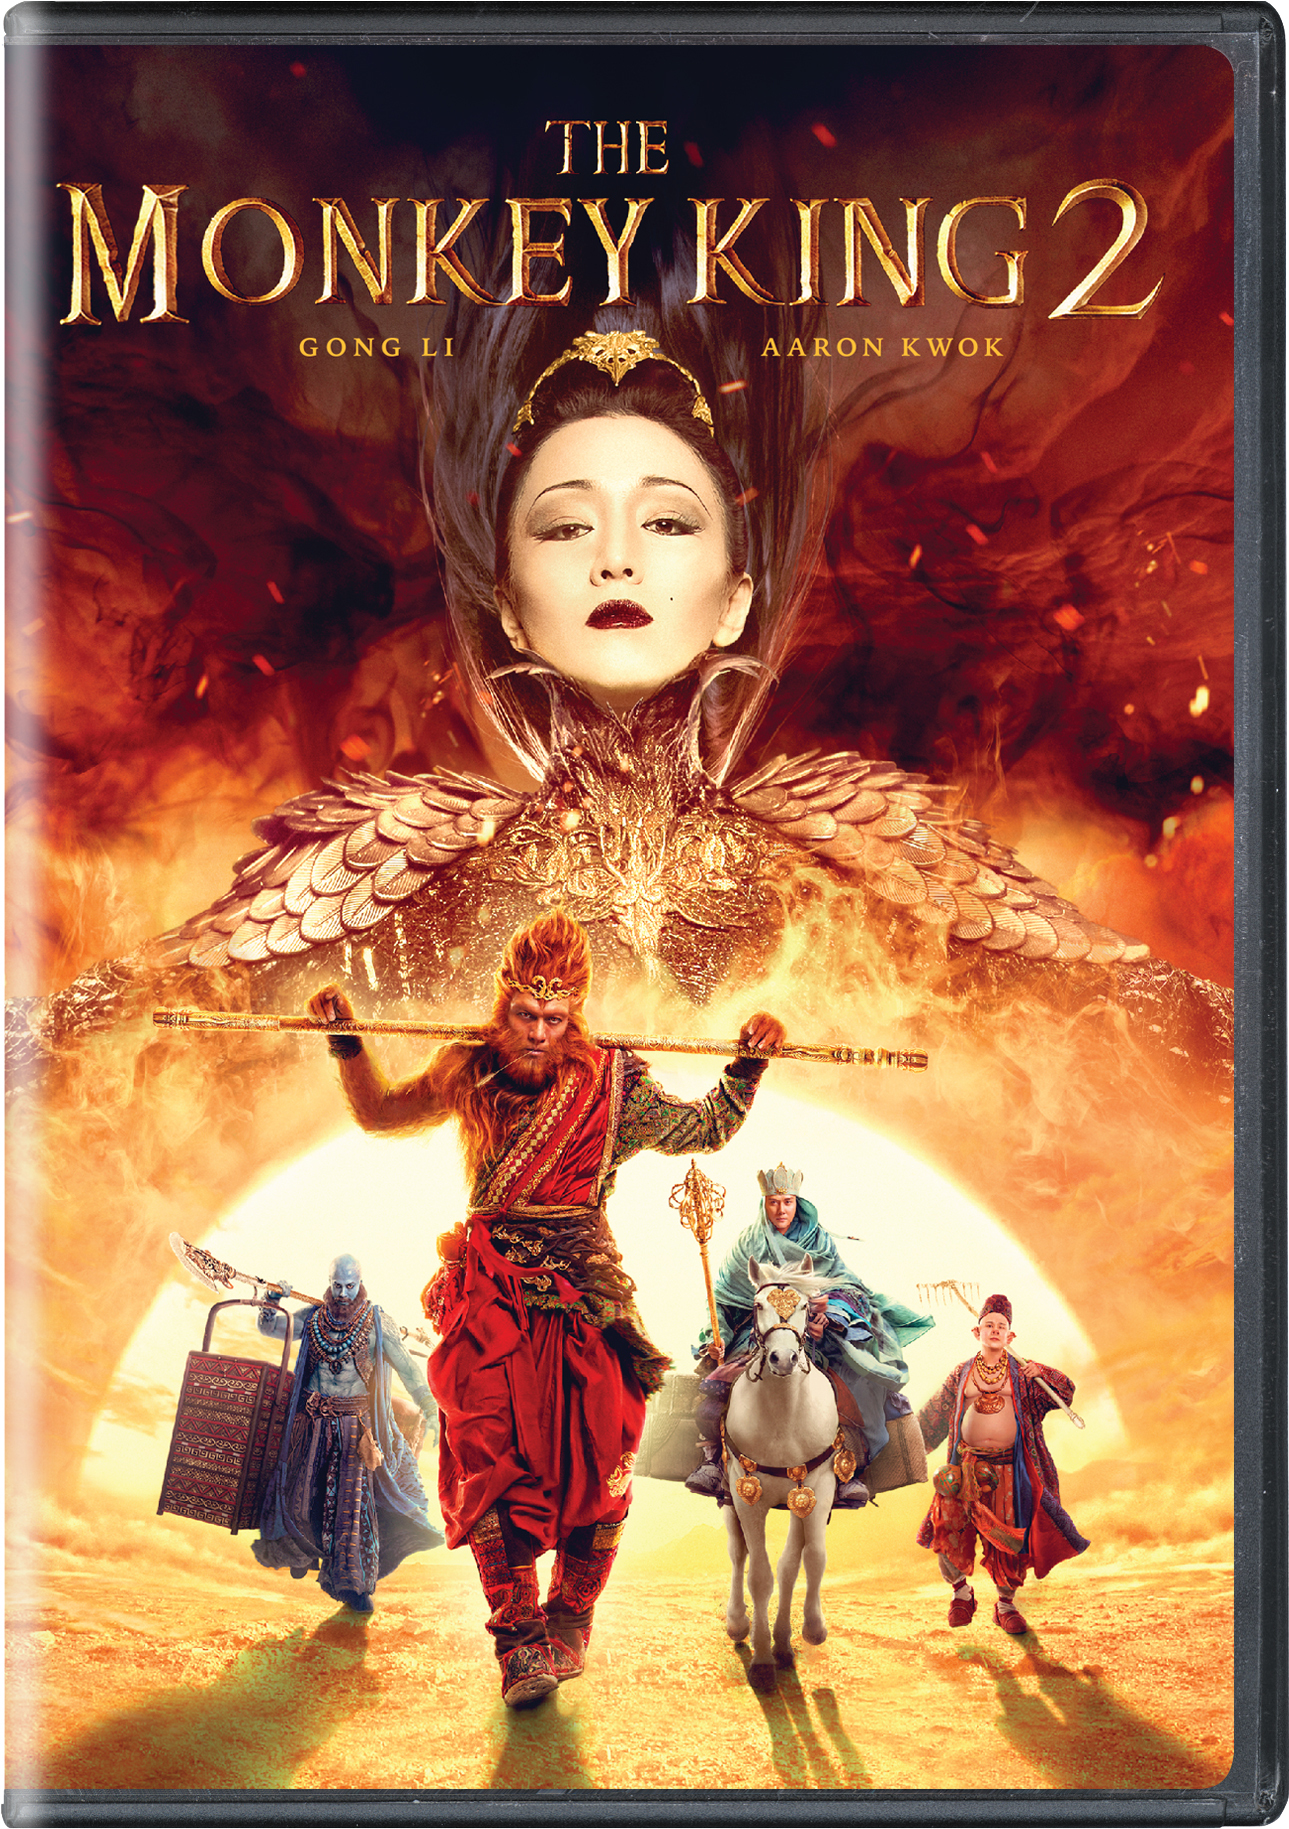 The Monkey King 2 - DVD [ 2016 ]  - Foreign Movies On DVD - Movies On GRUV